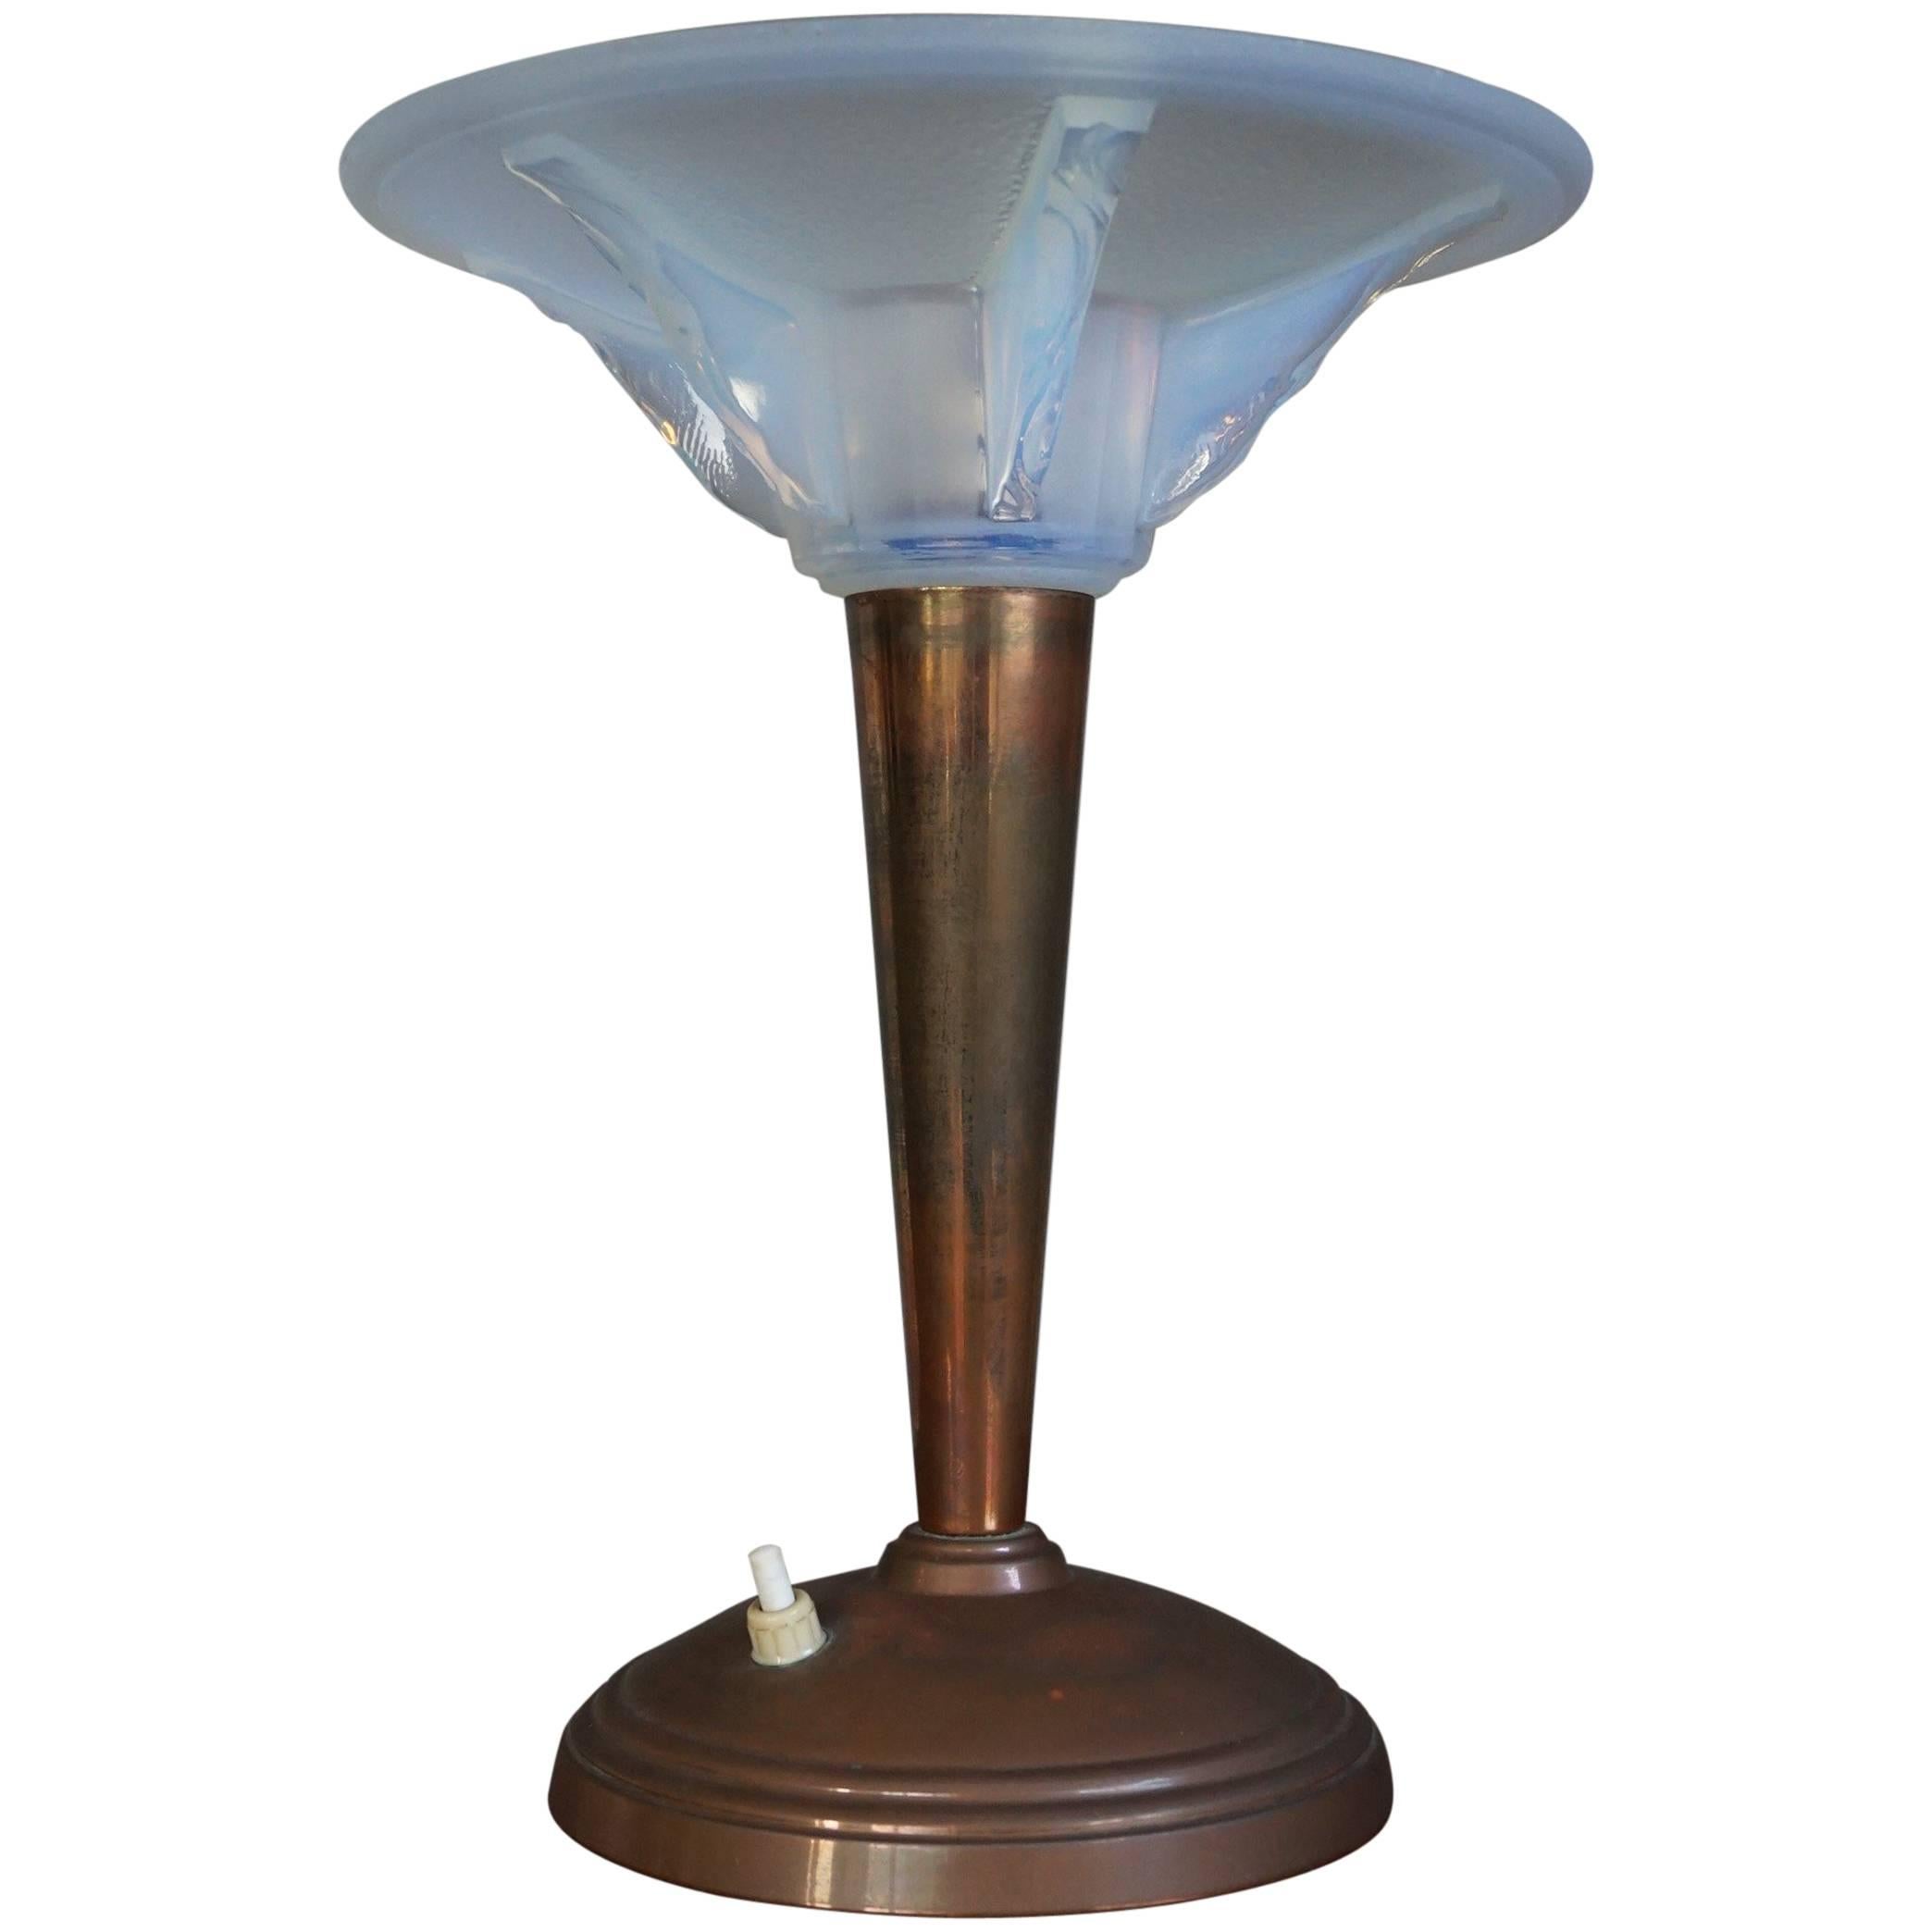 Art Deco Table or Desk Lamp with a Lalique Style Iridescent Blue Glass Shade